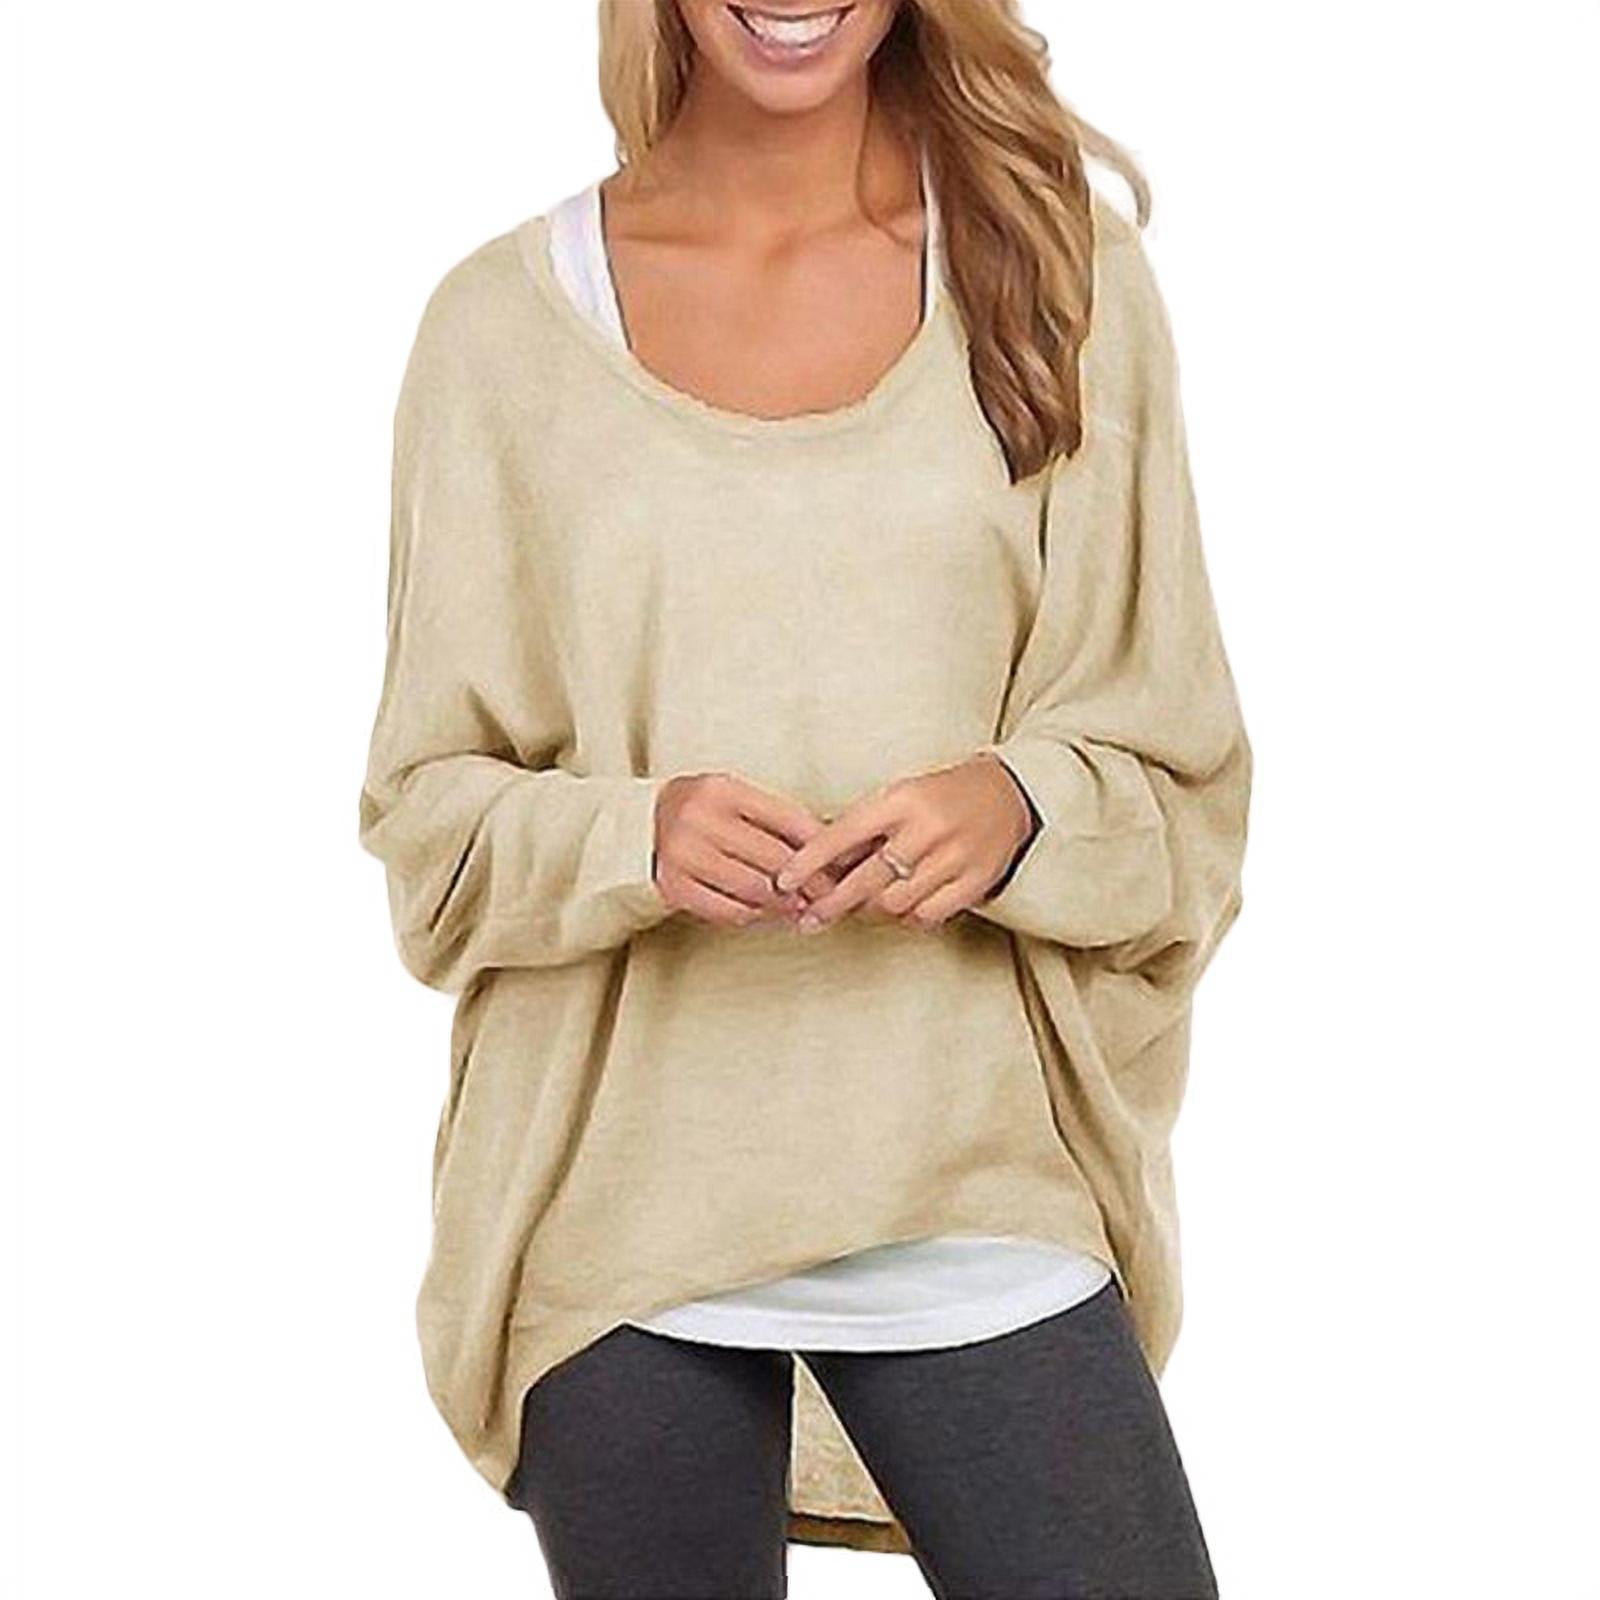 Women Knitted Batwing Jumper Cowl Neck Pullover Sweater Blouse Top Size 8-12 210 